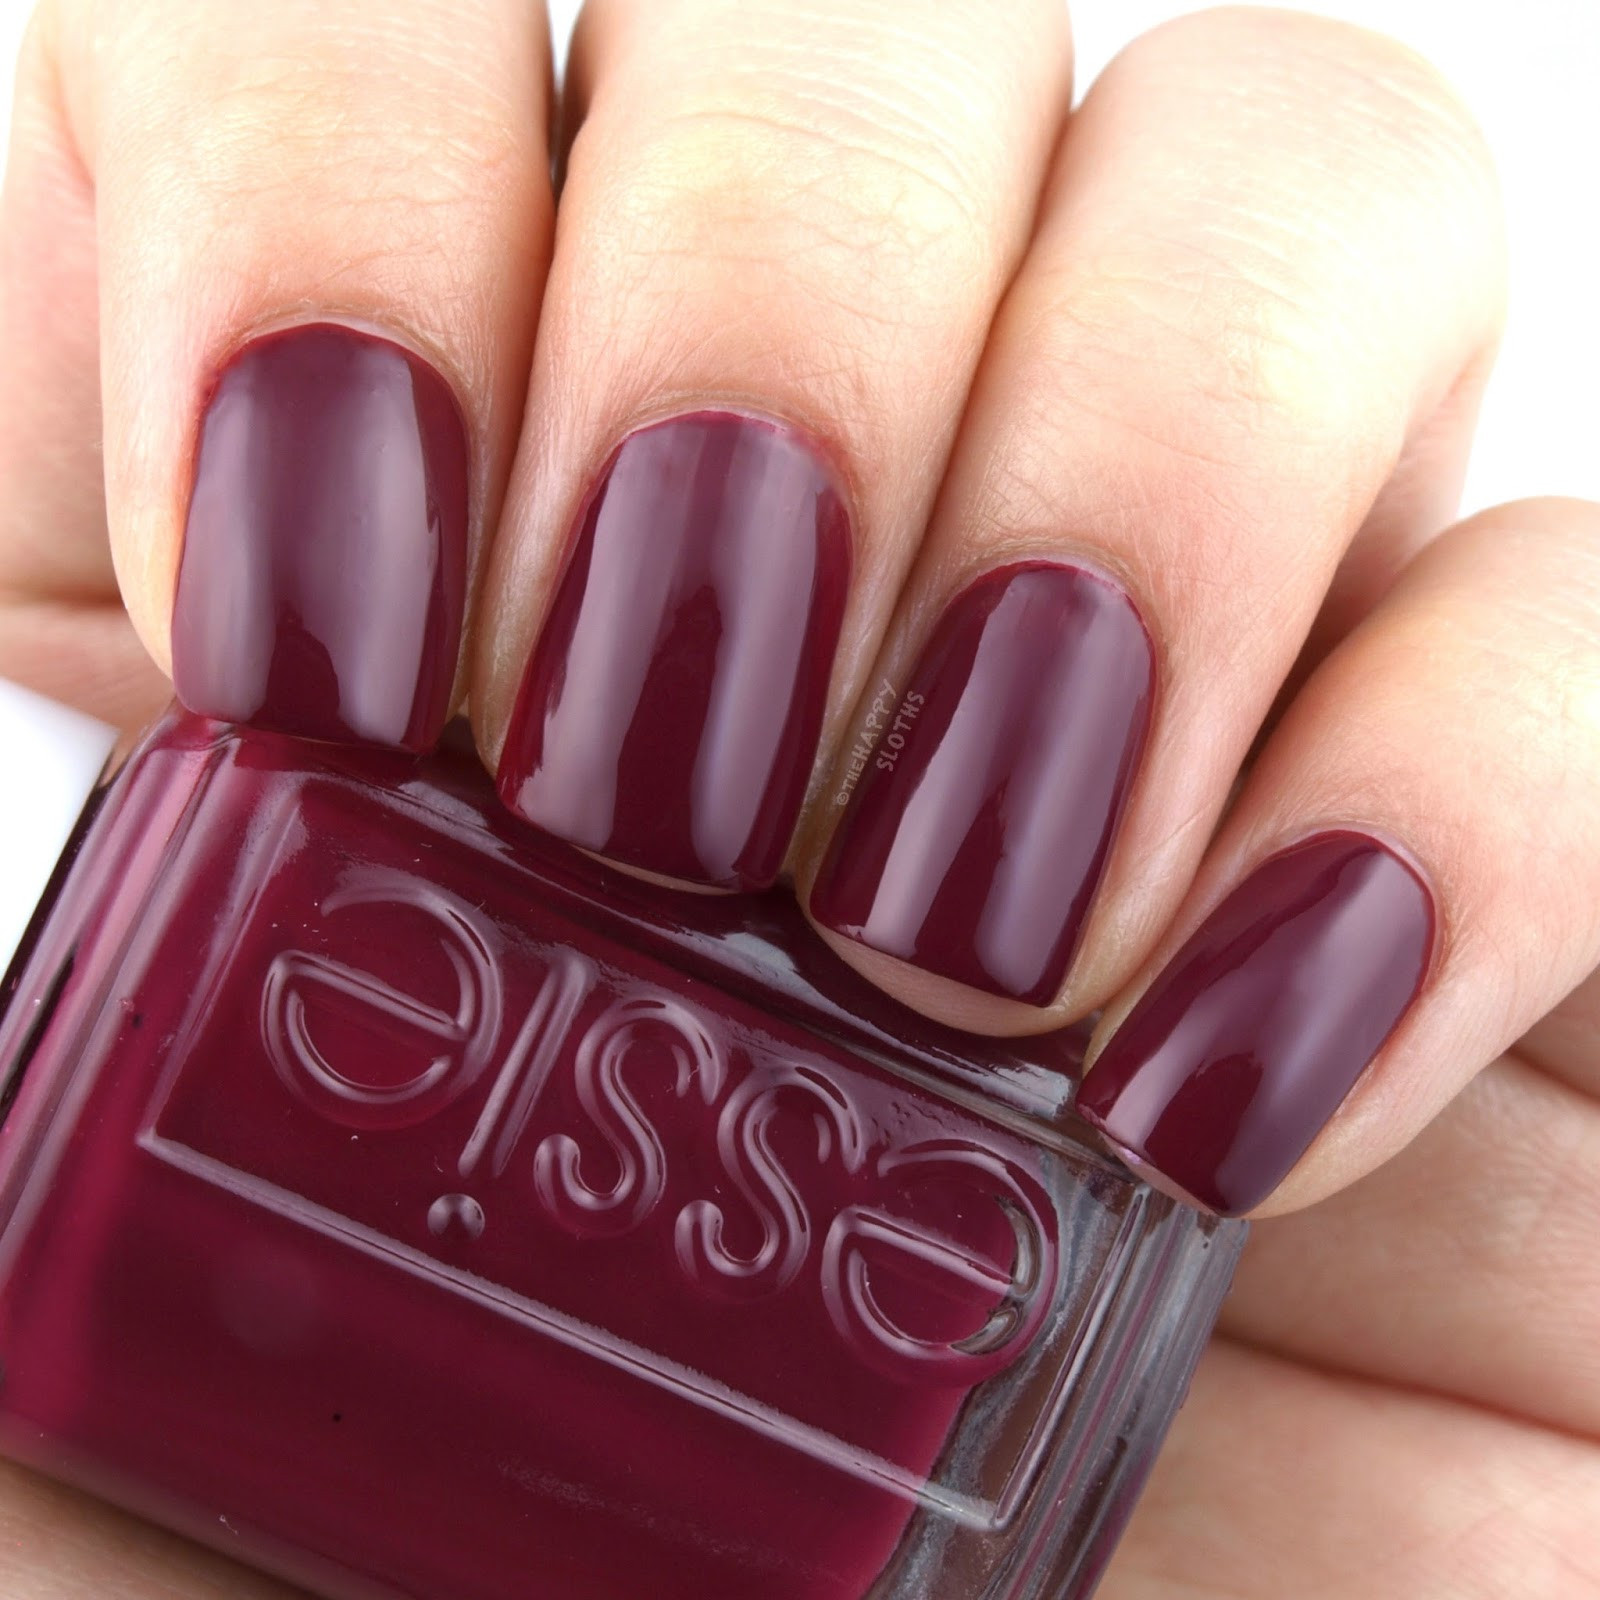 Essie Fall Nail Colors
 90s Inspired Nail Colors